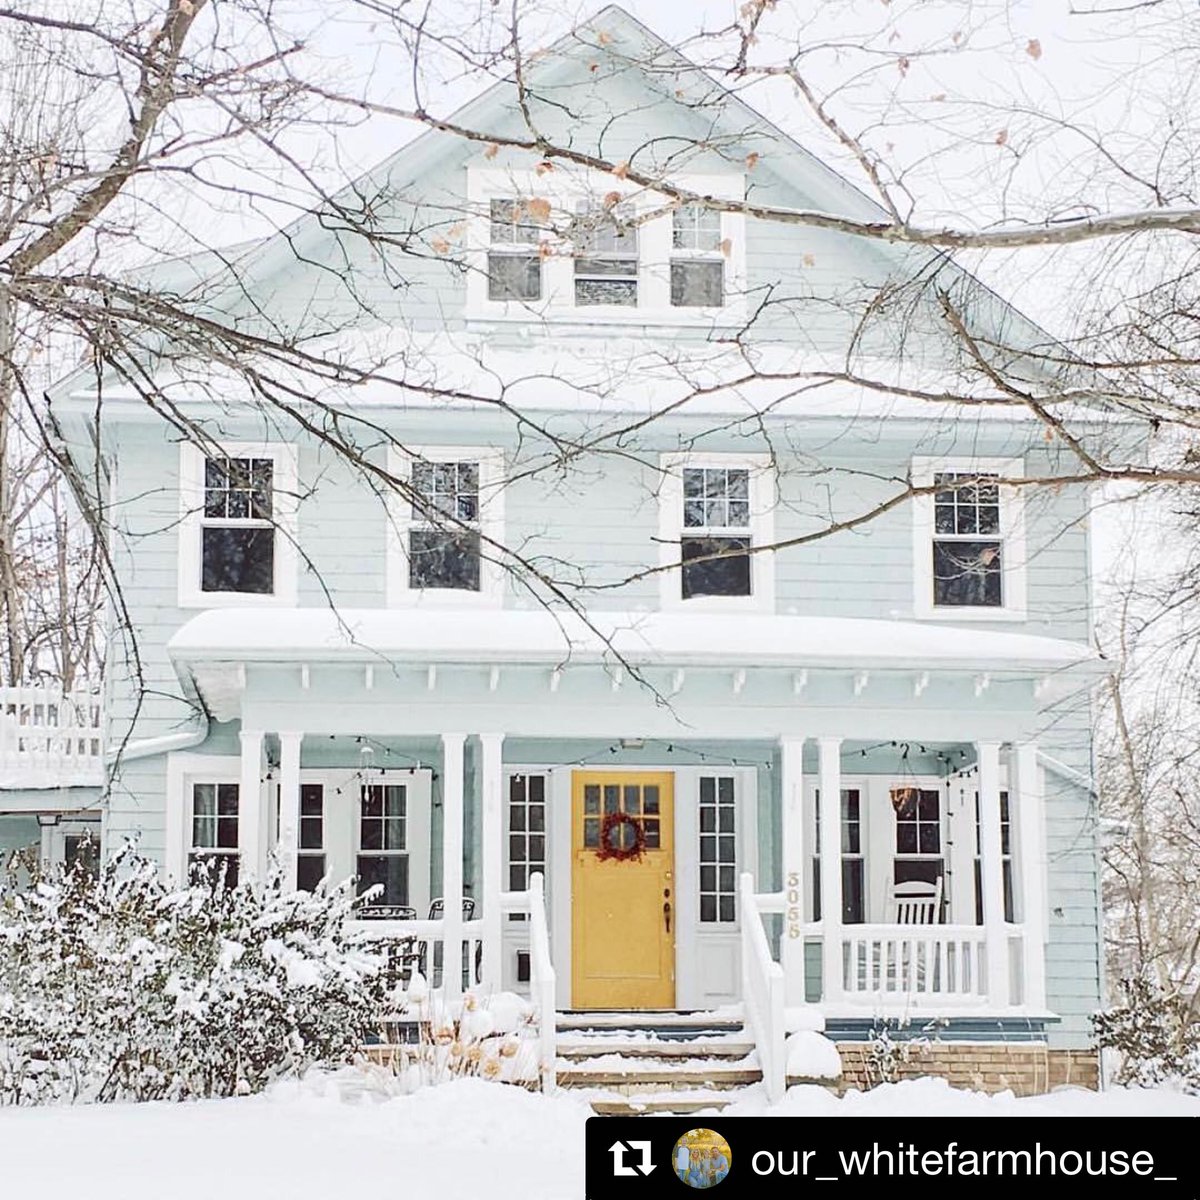 It’s amazing how good a house can look when you maintain it. A little care - even for the small stuff - can do wonders for its value. RG: @our_whitefarmhouse_ 
#luxuryhomes #luxurylifestyle #homerenovation #realestate #realtor #homerepair #curbappeal #farmhouse